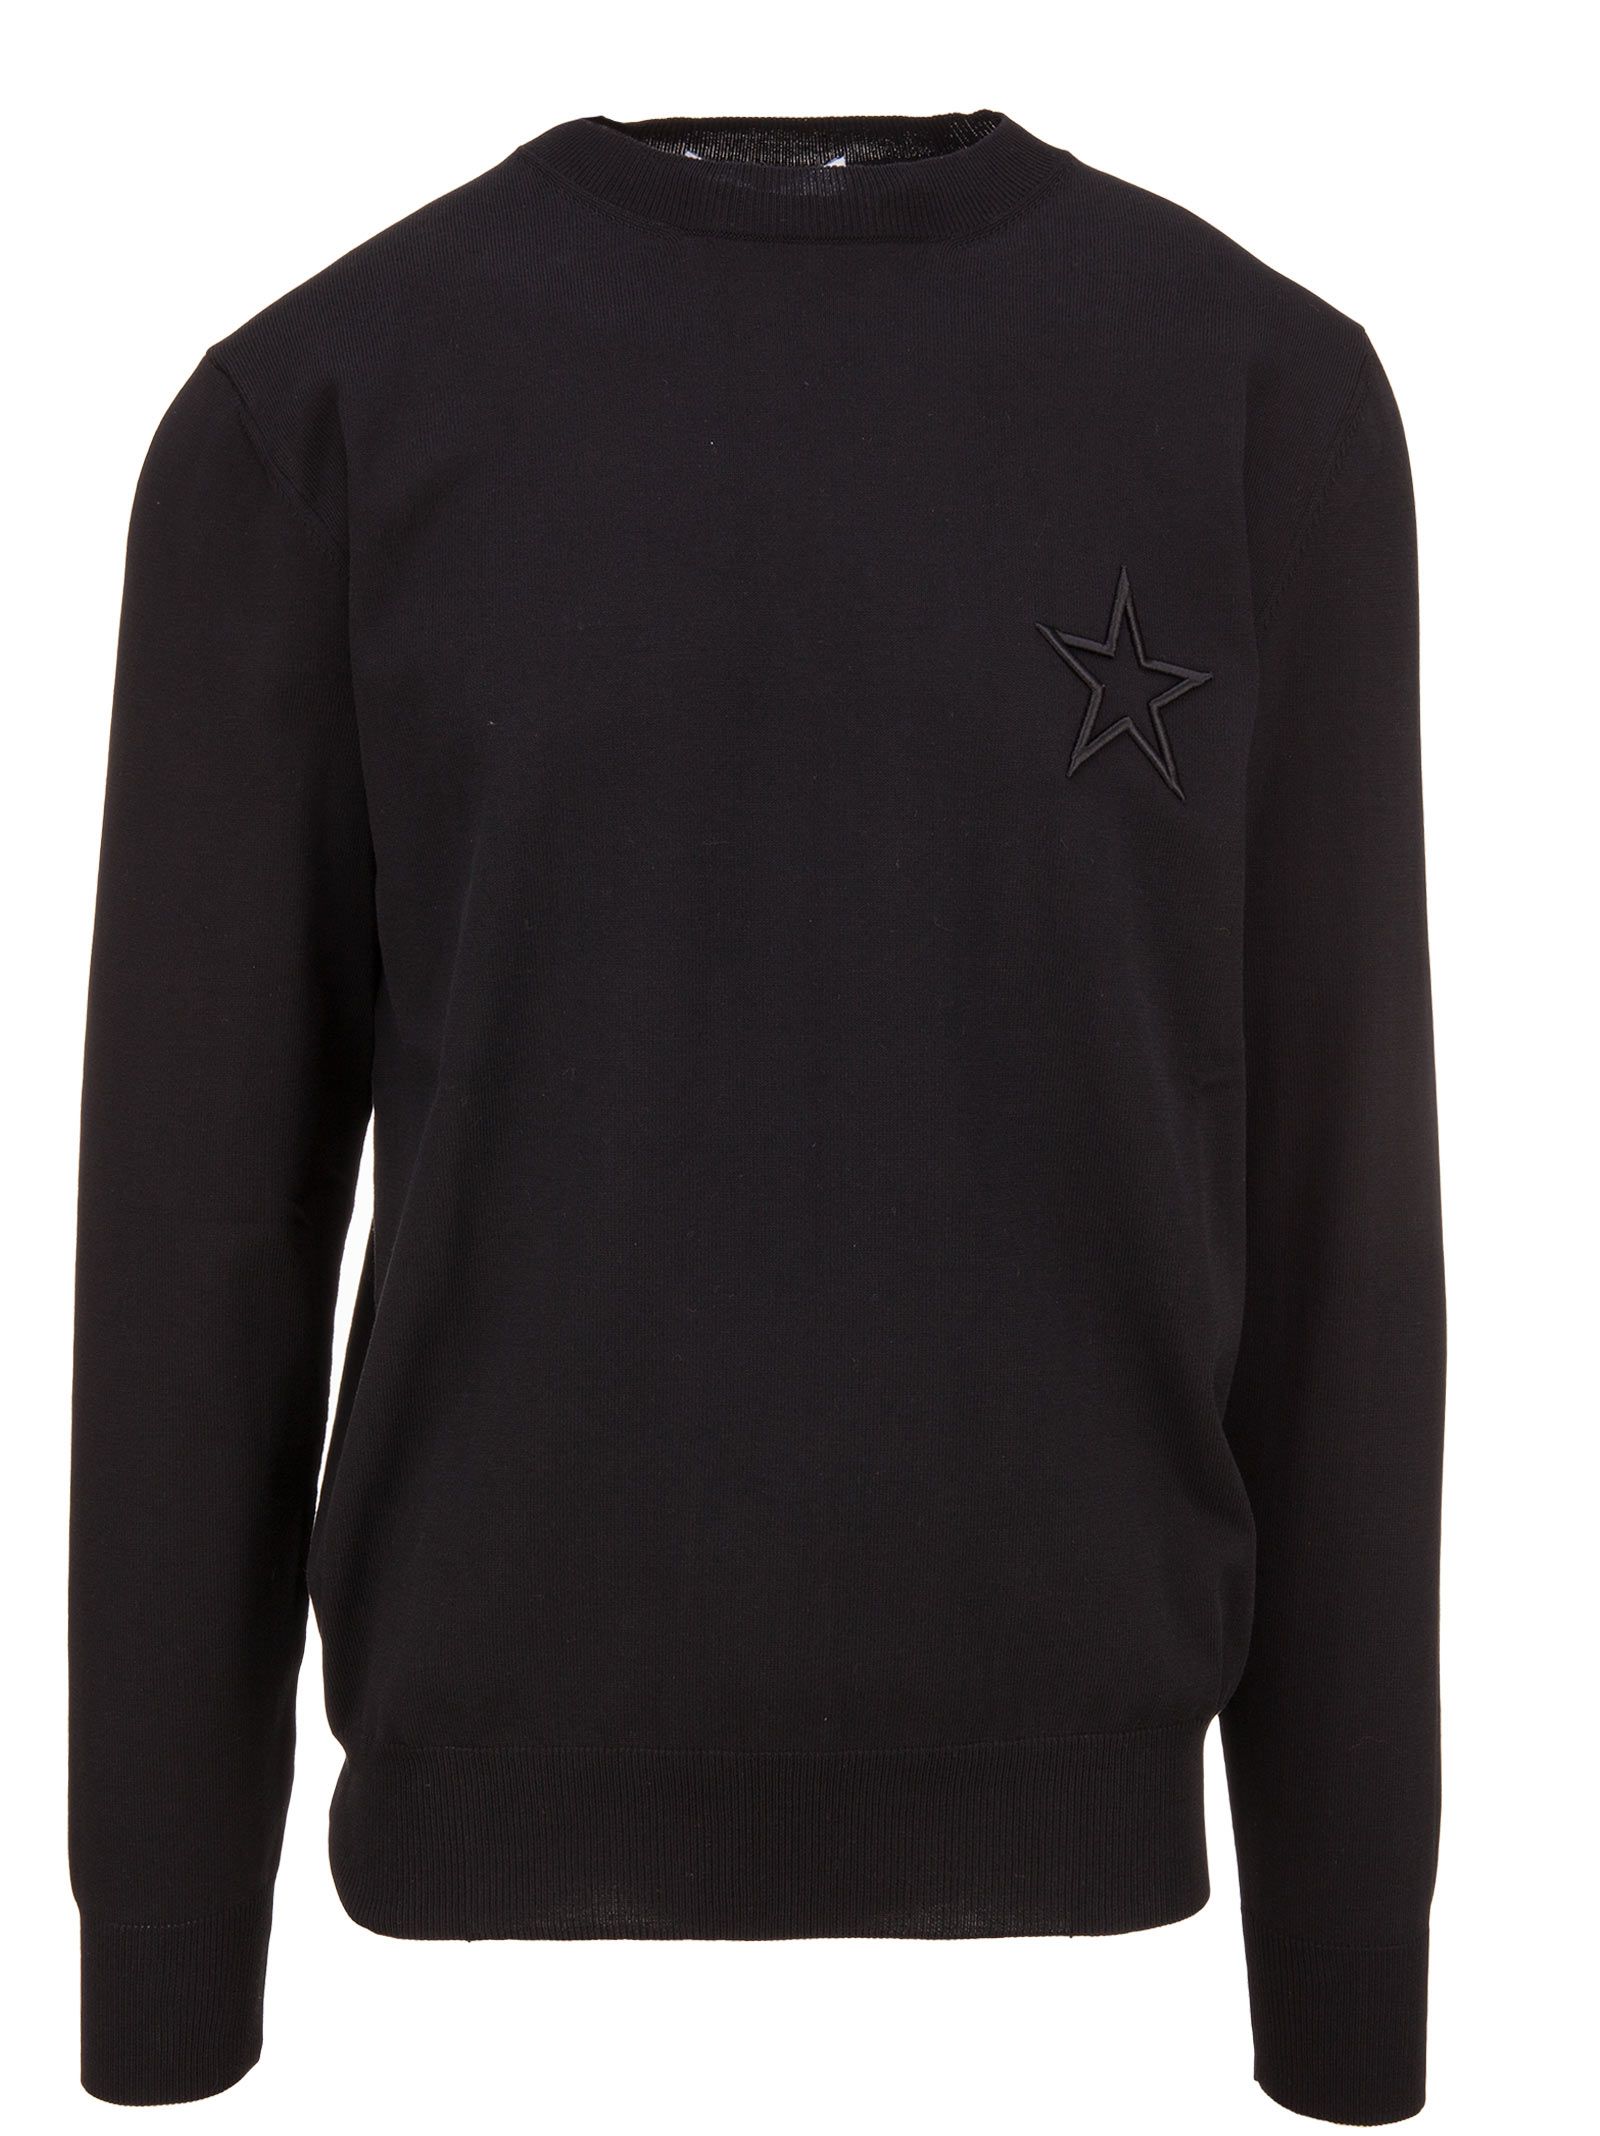 Givenchy - Givenchy Sweater - Nero, Men's Sweaters | Italist